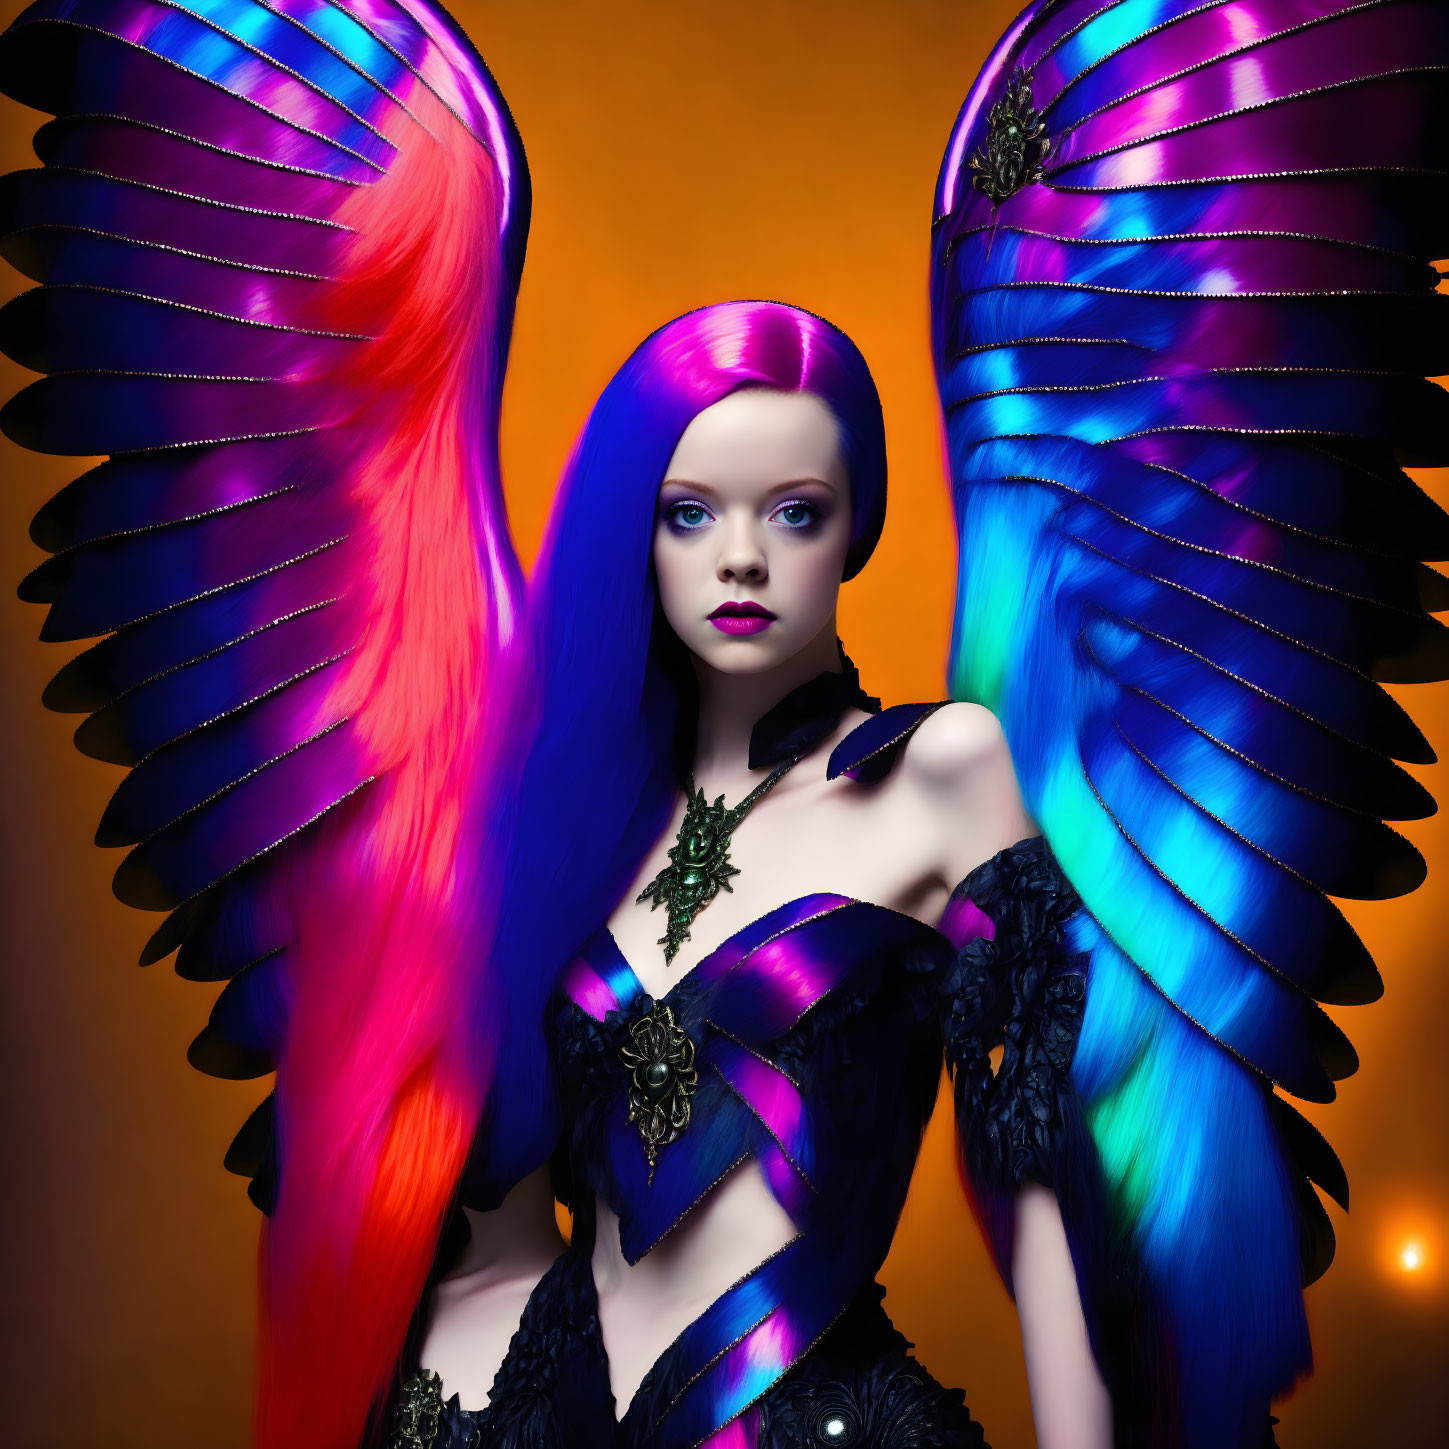 Colorful person with rainbow wings and purple hair on orange background in dark feathered outfit